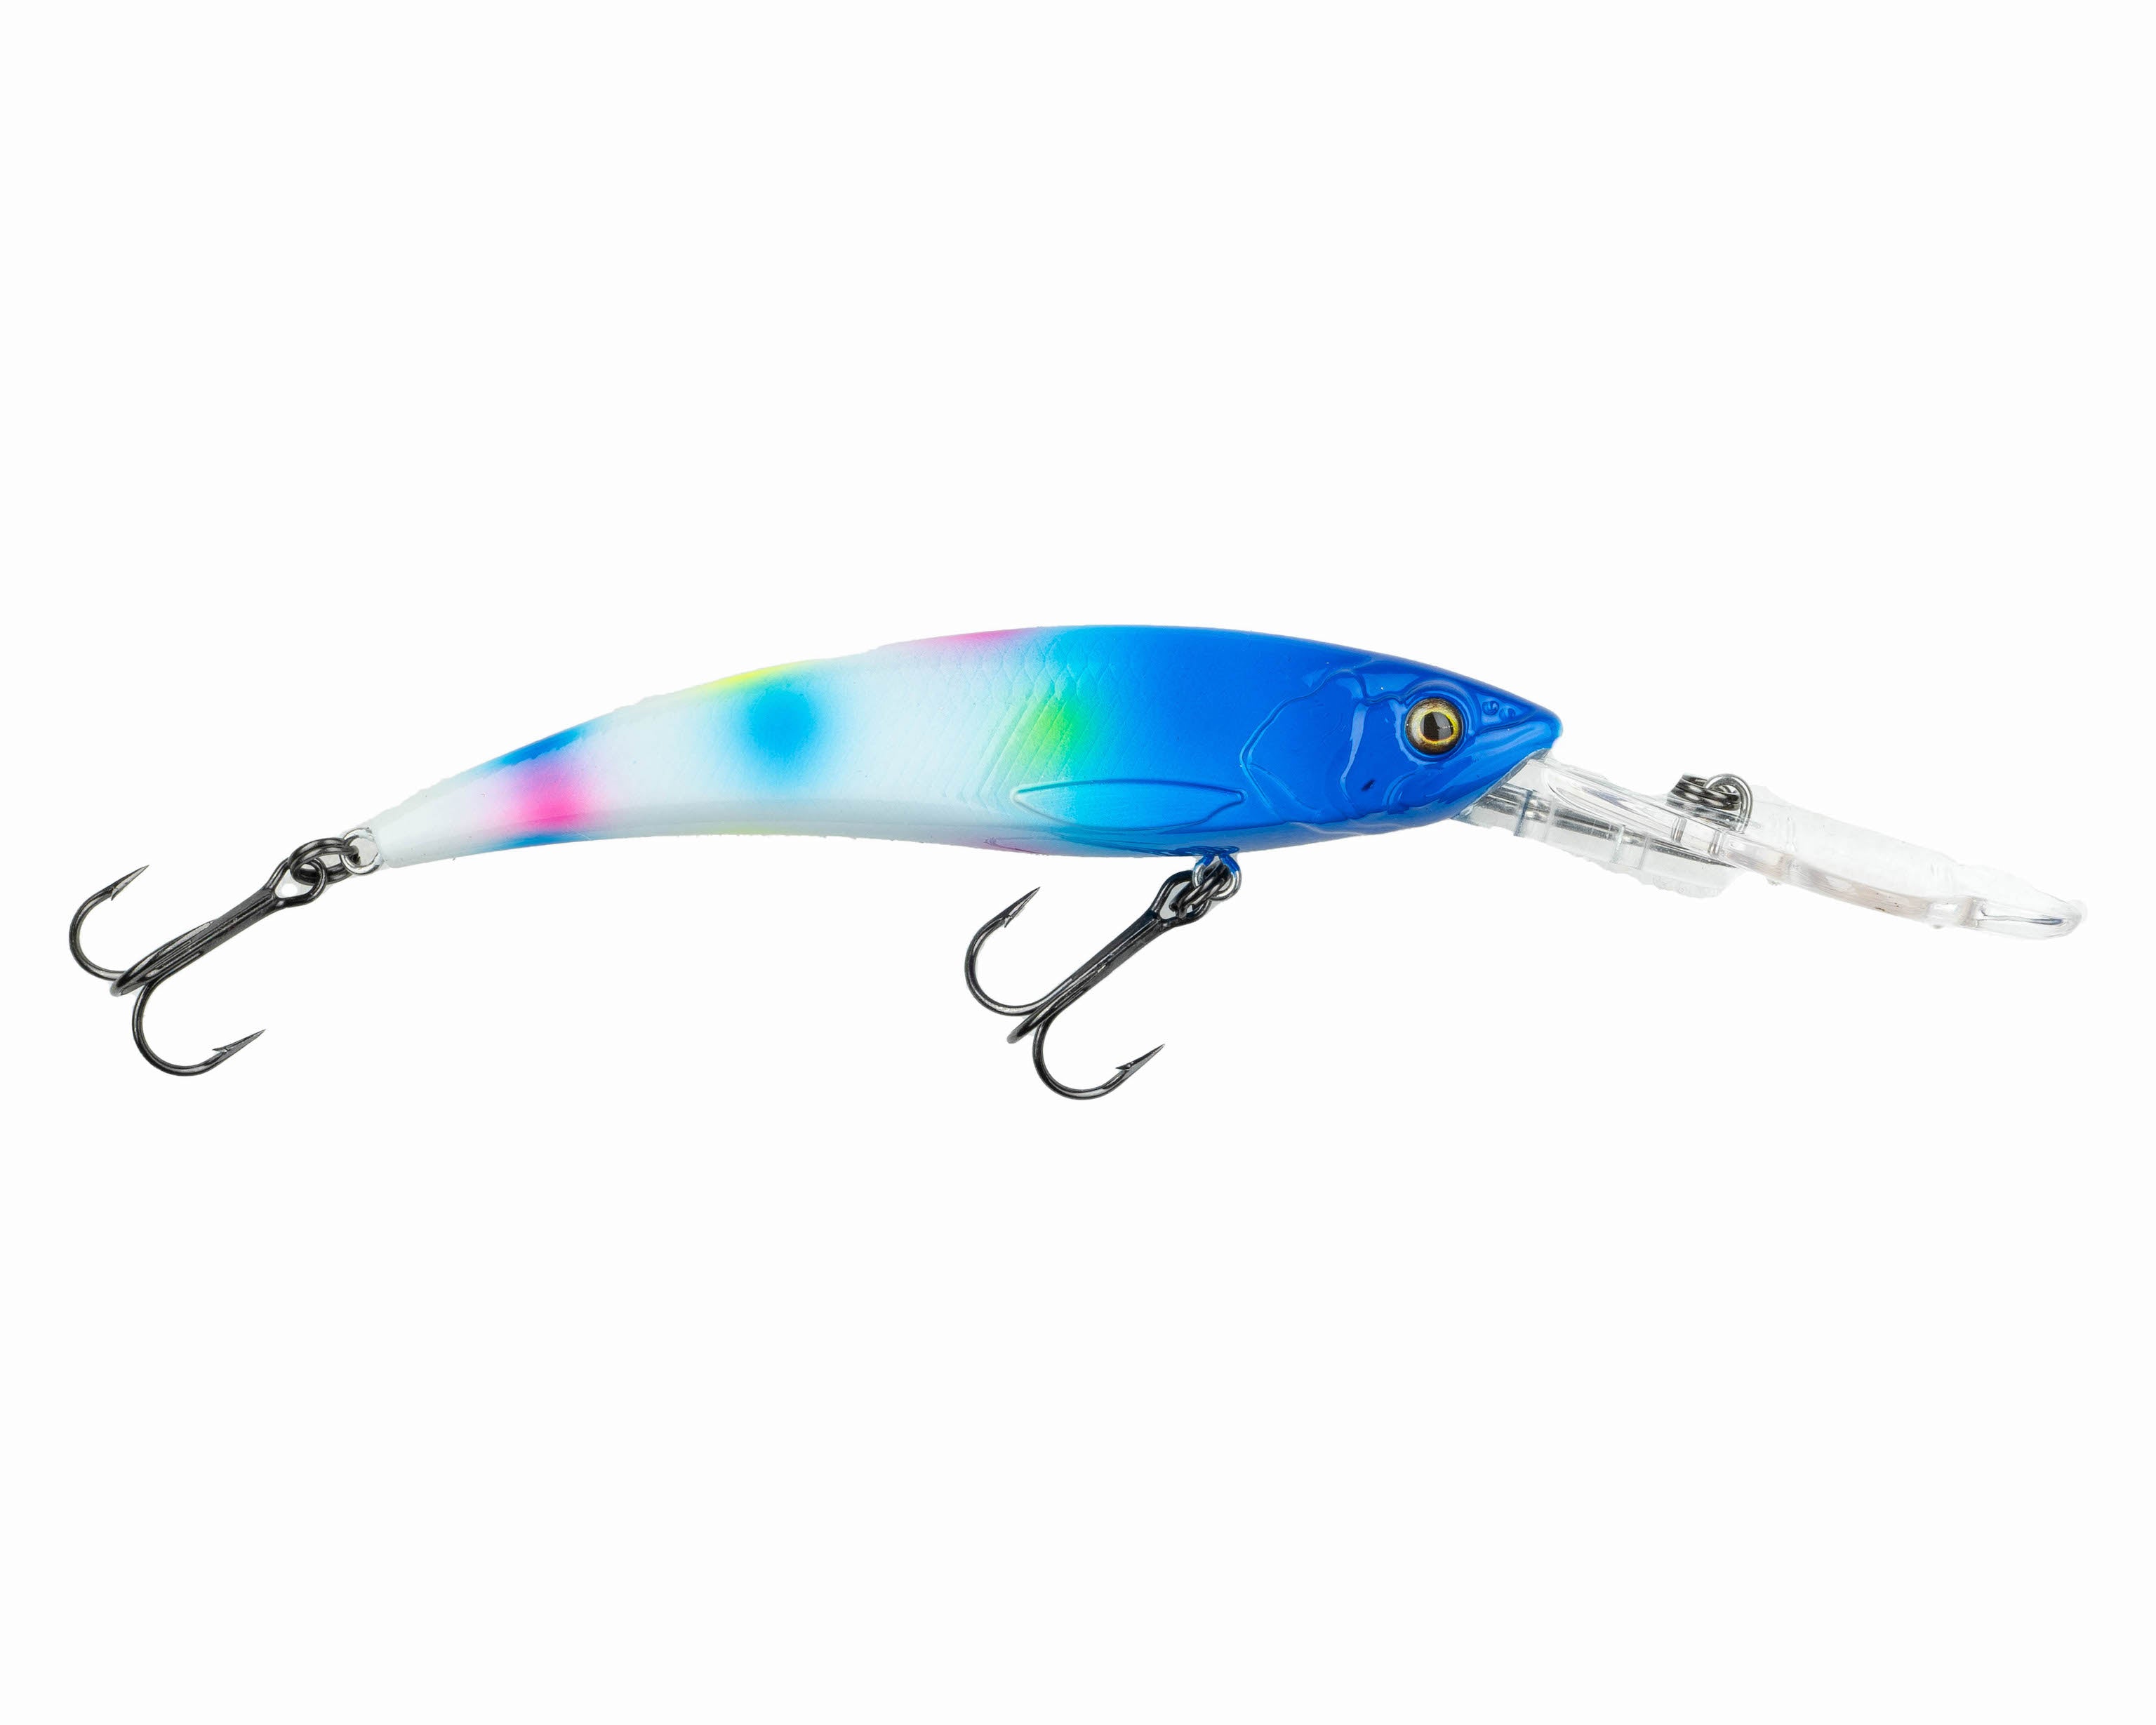 BLUEWING Deep Diving Lures Deep Dive Trolling Lure 3D Diving Minnow  Jerkbait Lure with Hook Saltwater Fishing Lures 230mm/9.05in SBM